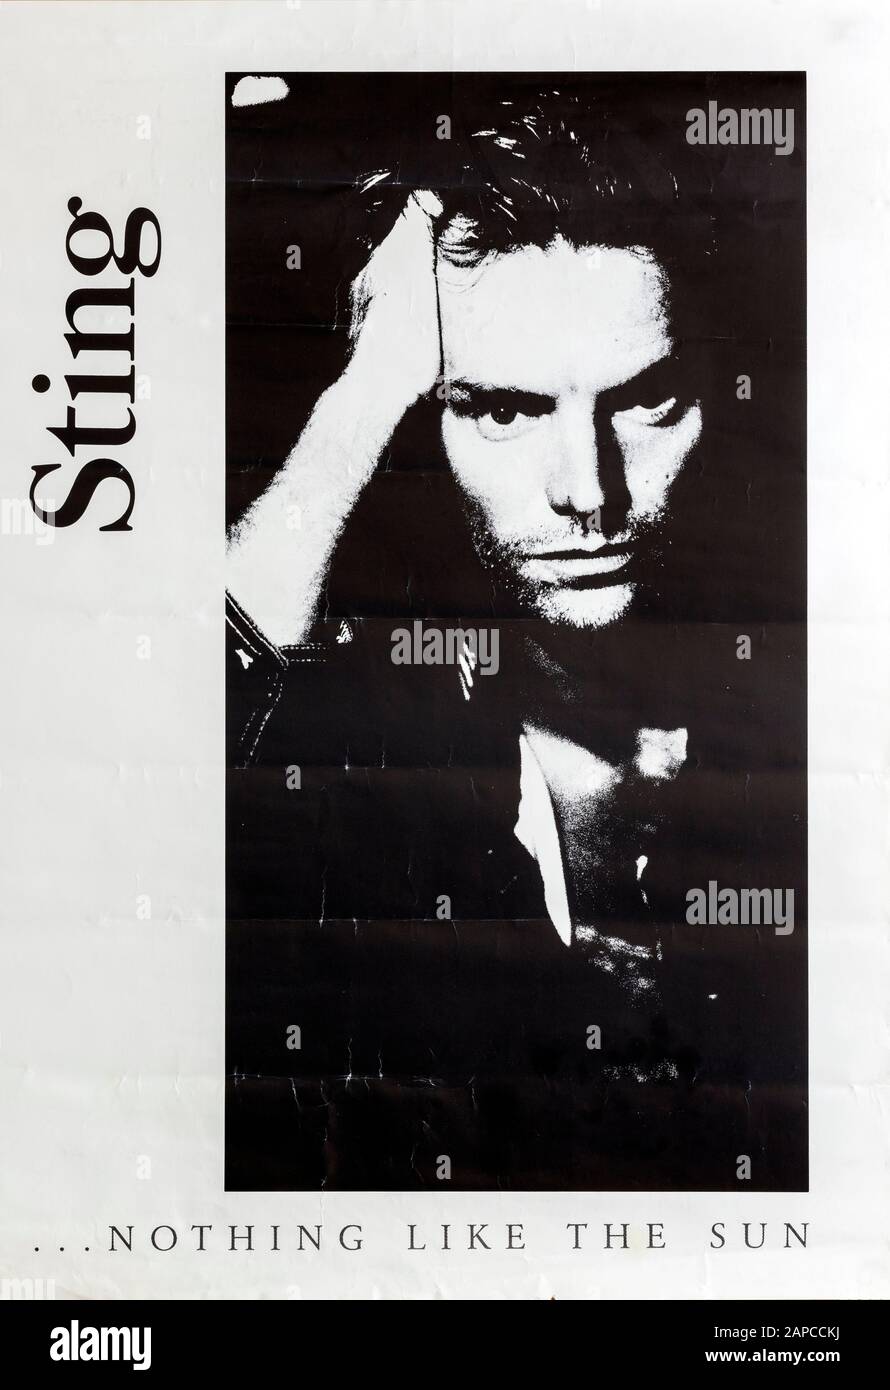 Sting, Nothing Like The Sun promo album, Musical concert poster Stock Photo